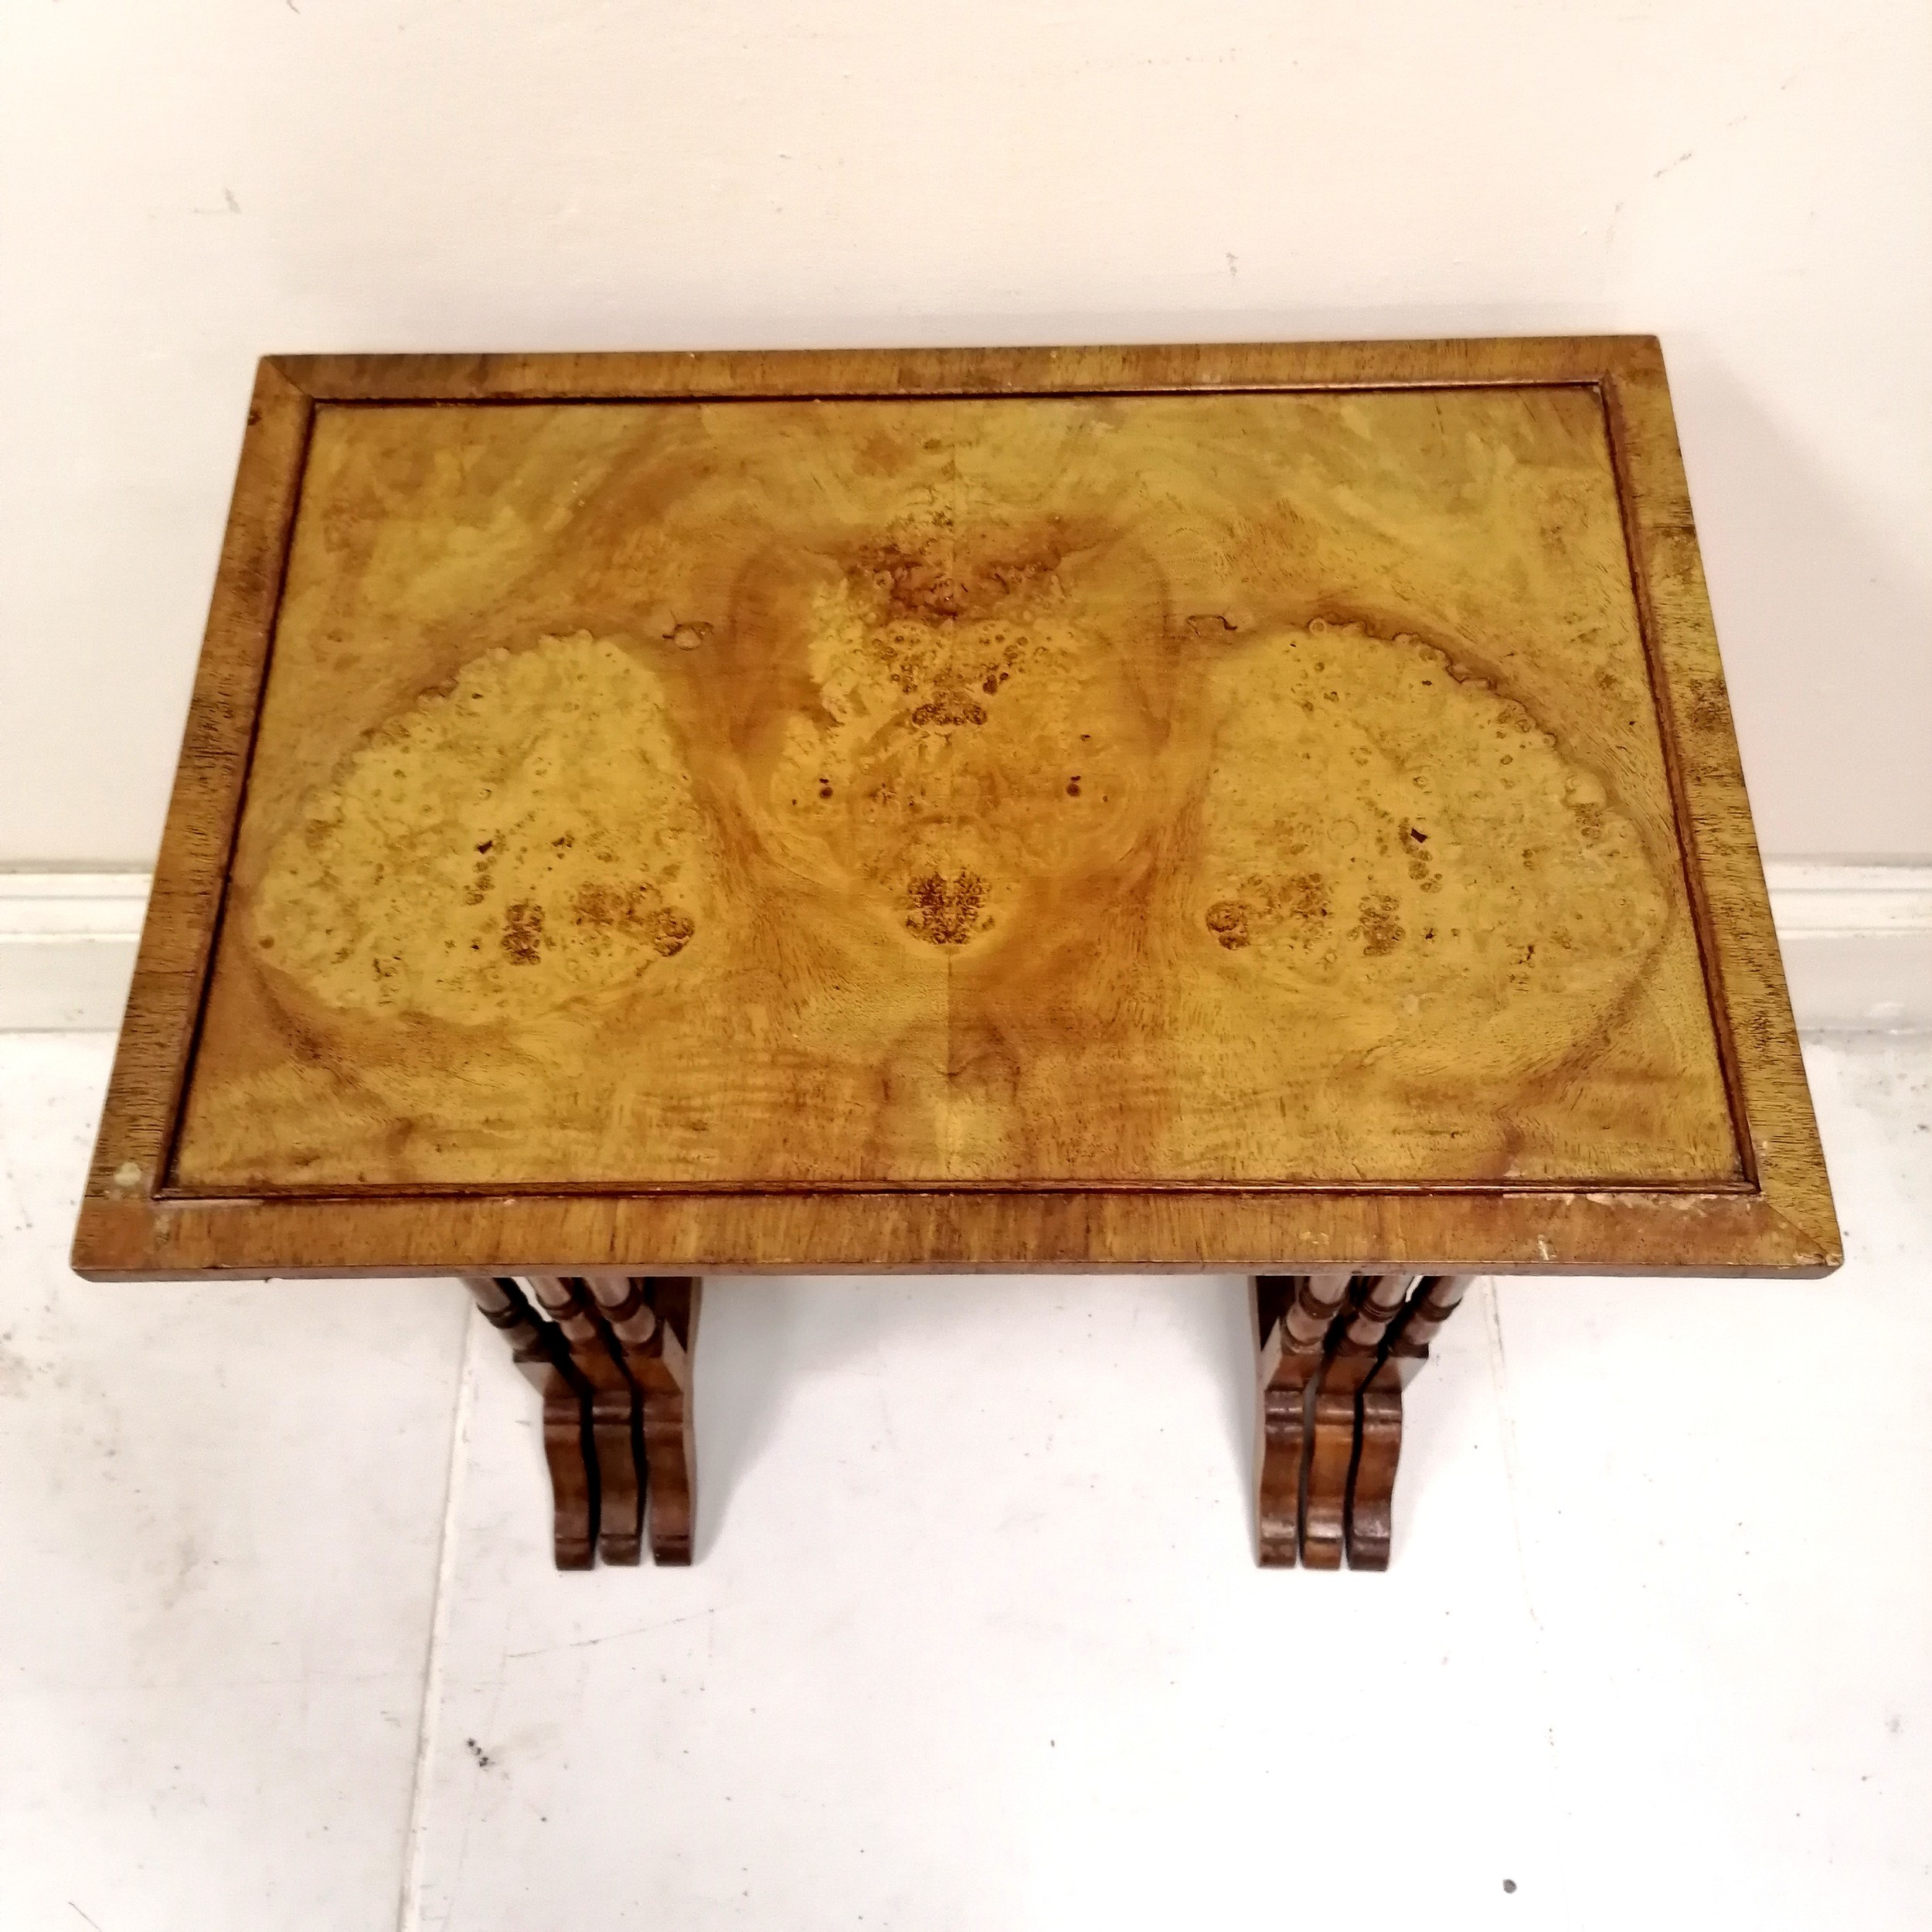 Nest of 3 Walnut reproduction tables - 51cm wide x 35cm deep x 60cm high & in used condition - Image 2 of 5